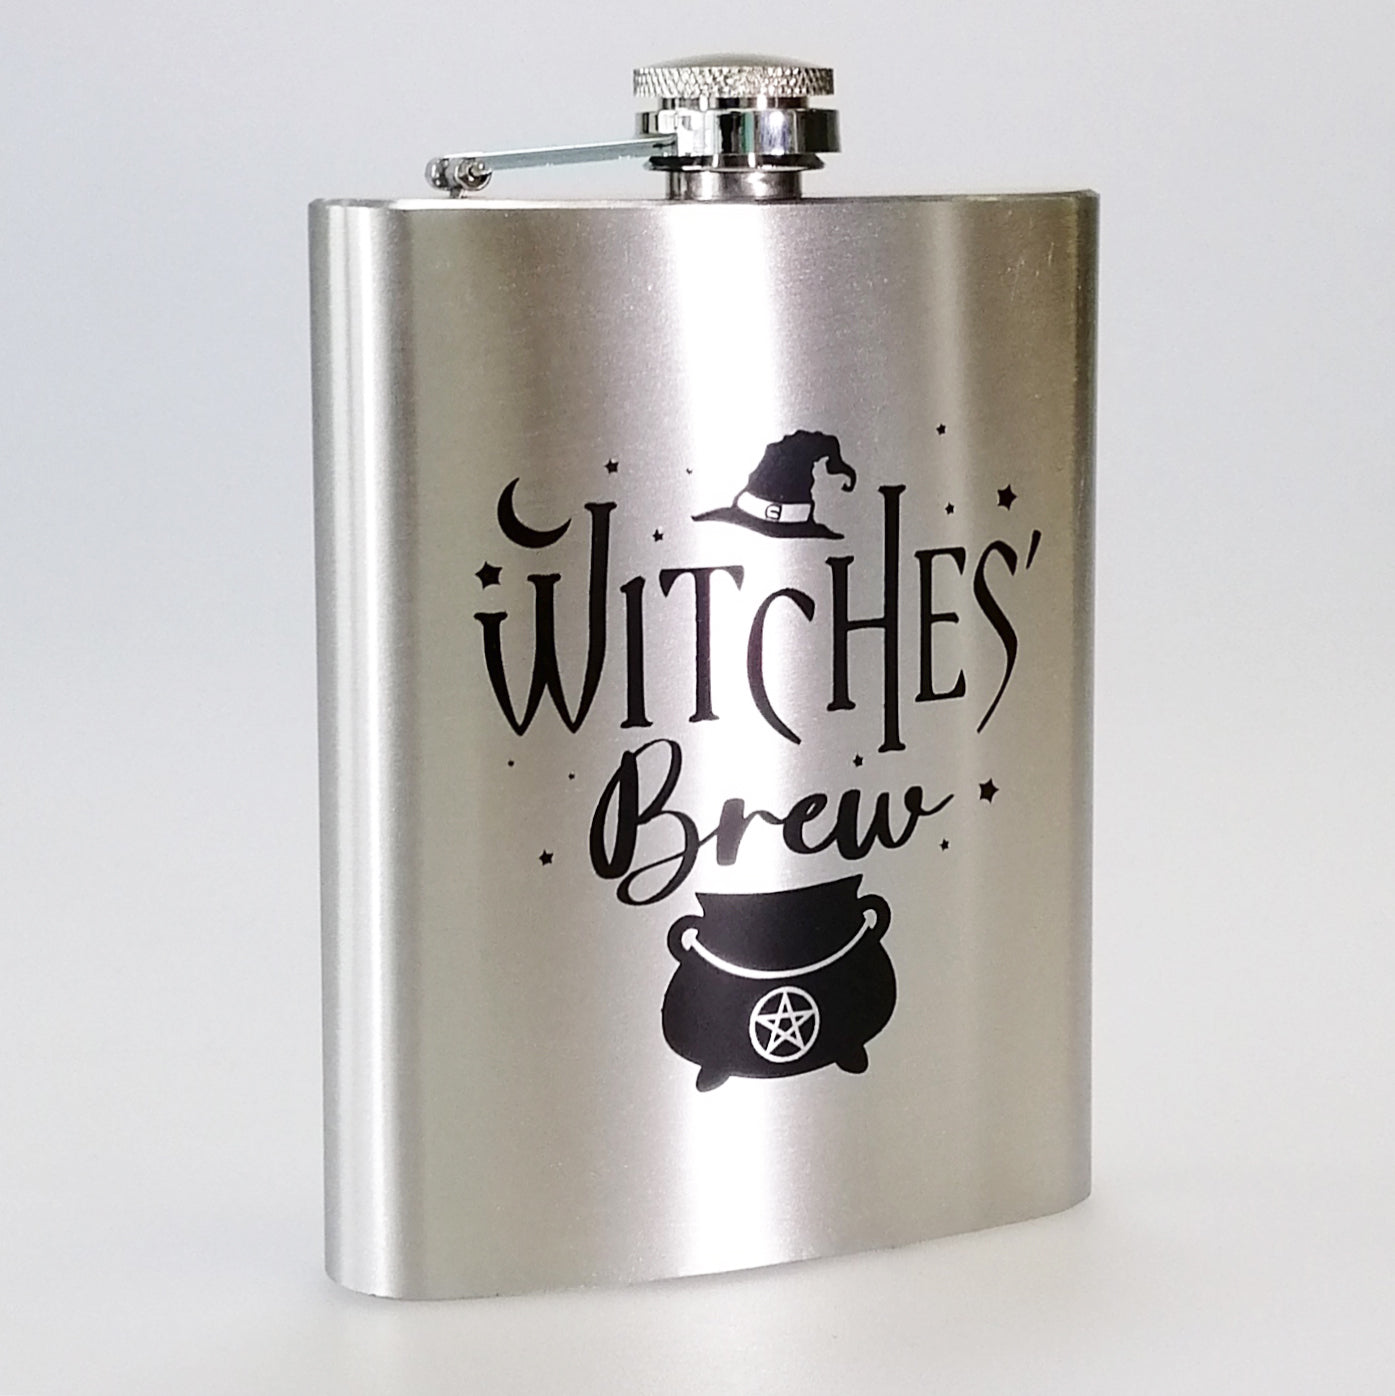 Stainless Steel 'Witches' Brew' Flask - 235ml